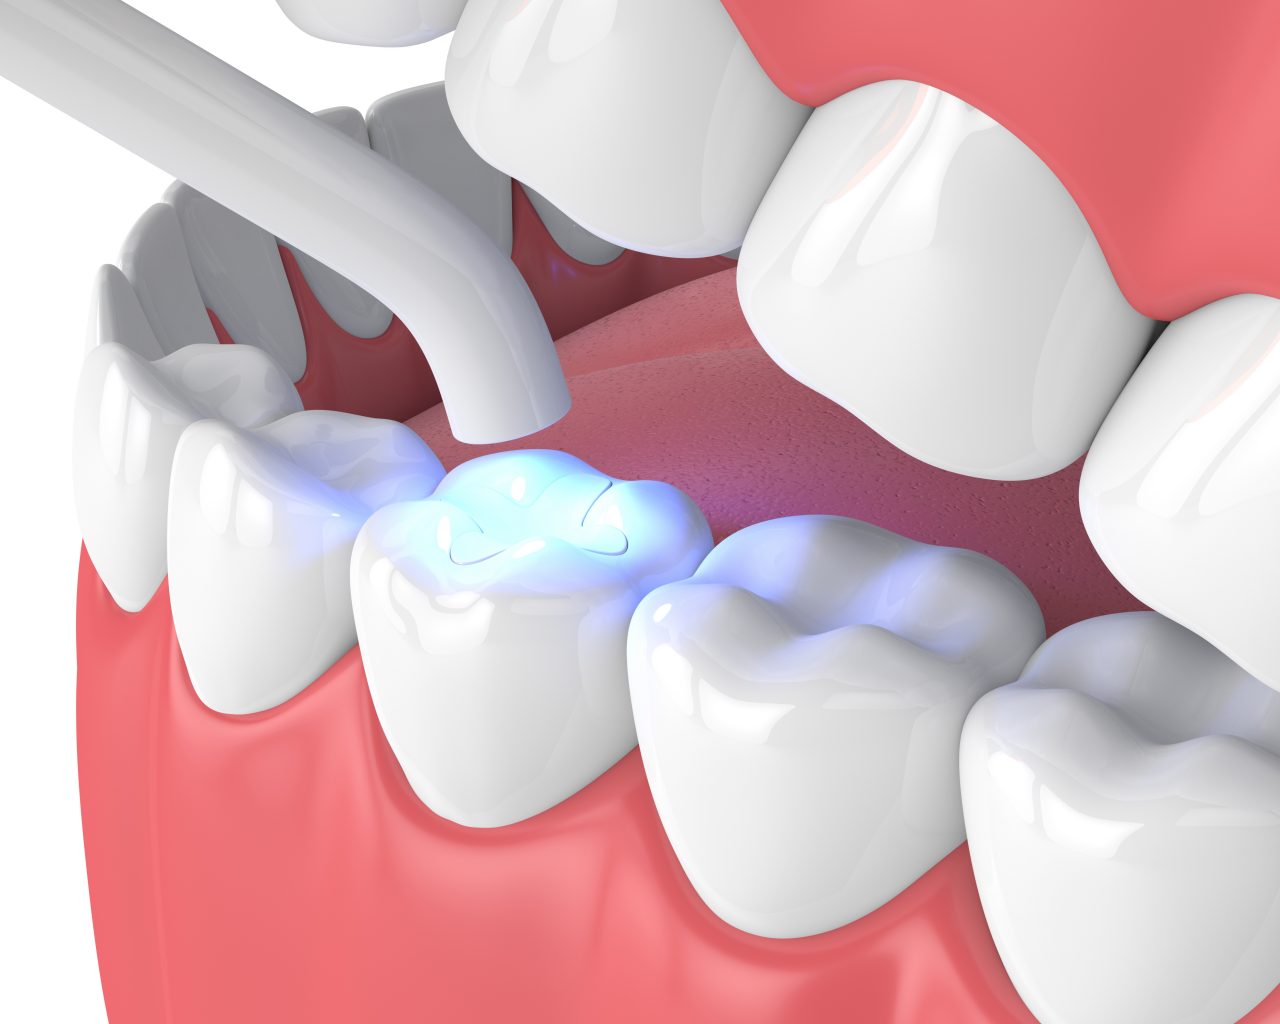 3d Render Of Jaw With Dental Polymerization Lamp And Light Cured Inlay